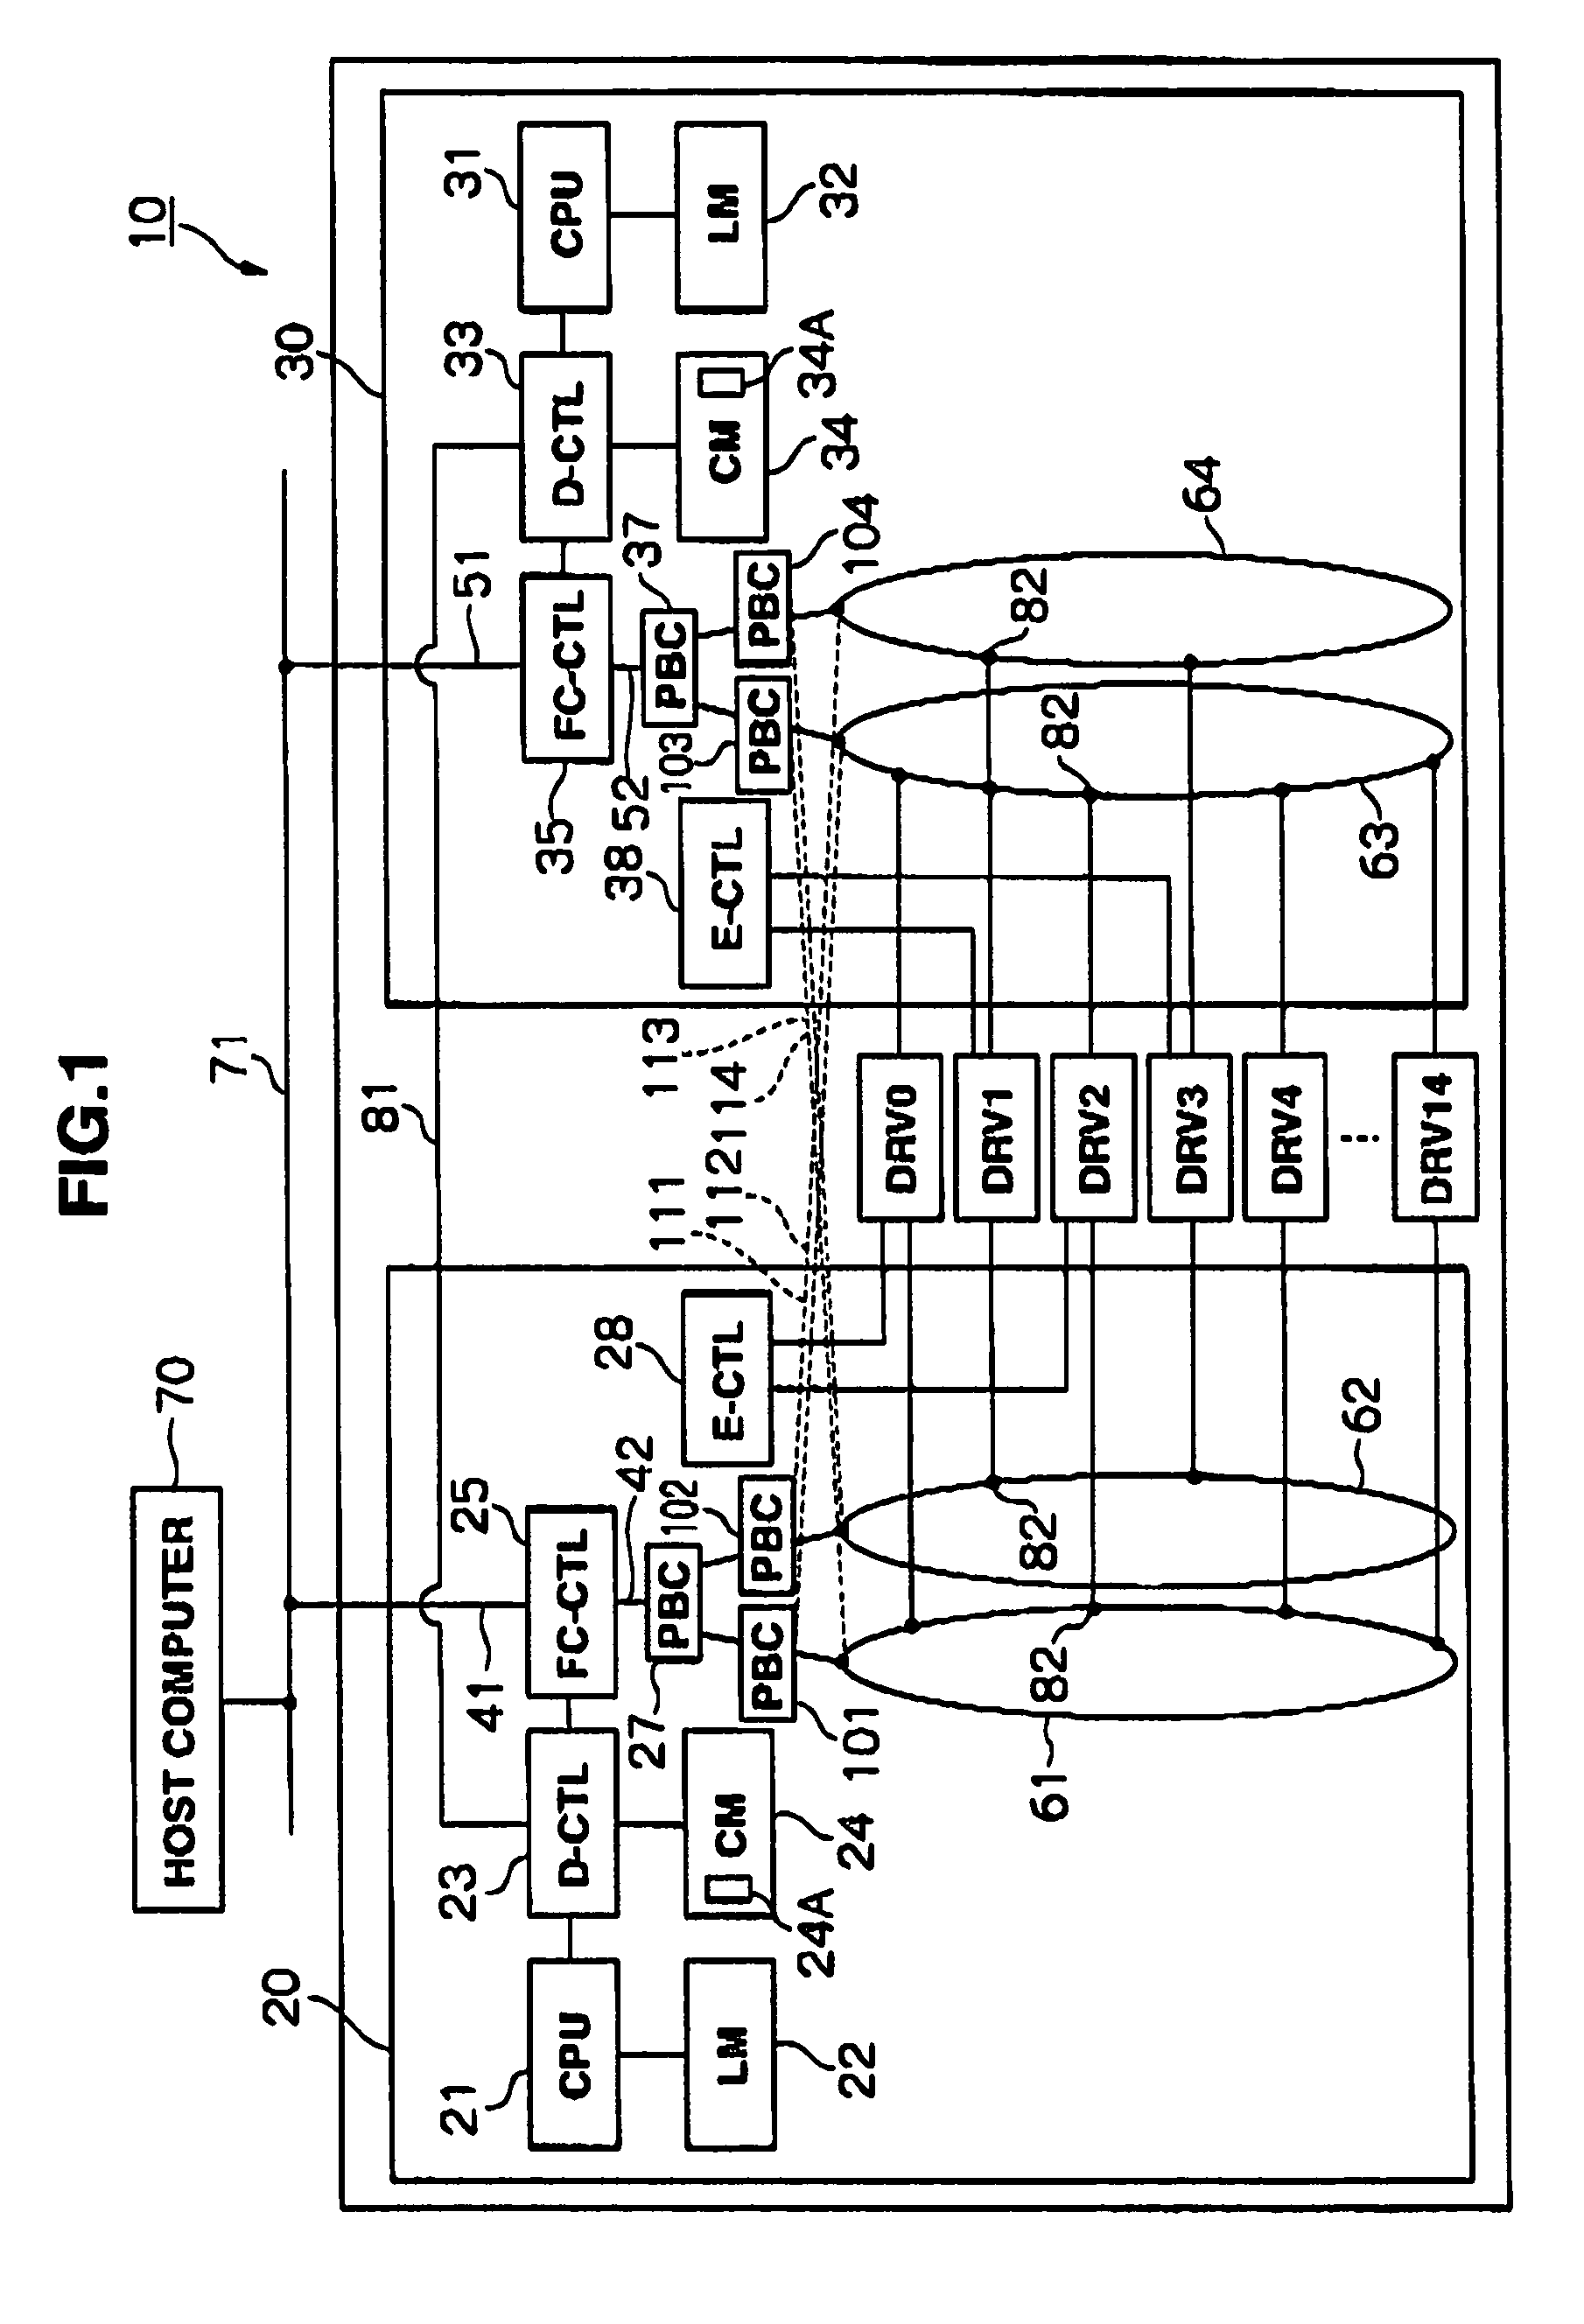 Disk array apparatus and method for controlling the same